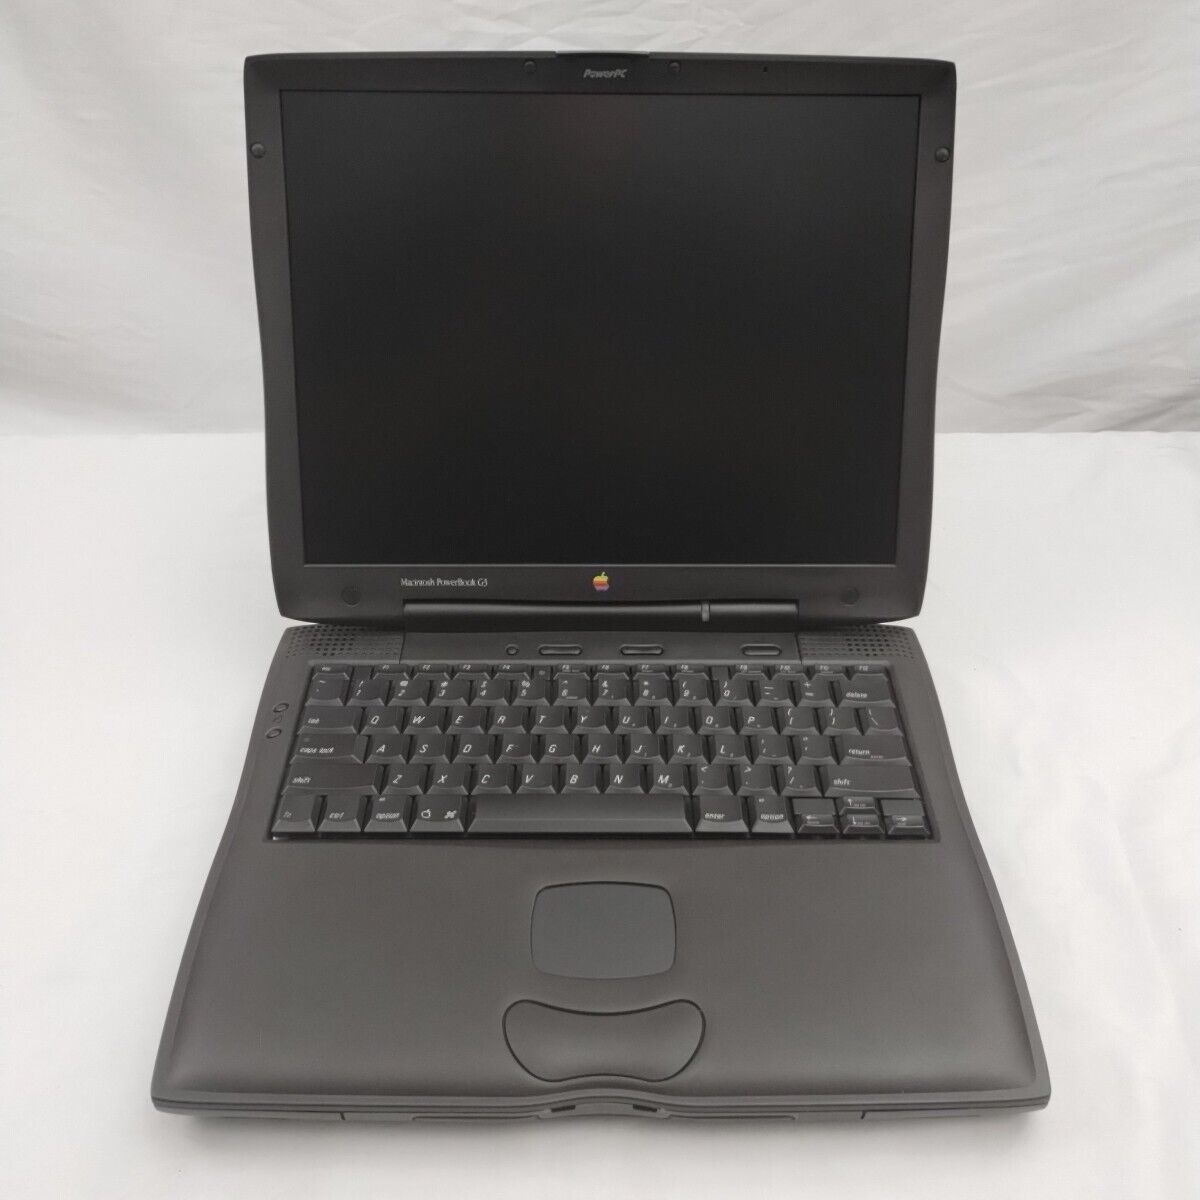 Vintage Apple Macintosh G3 PowerBook Untested For Parts As Is